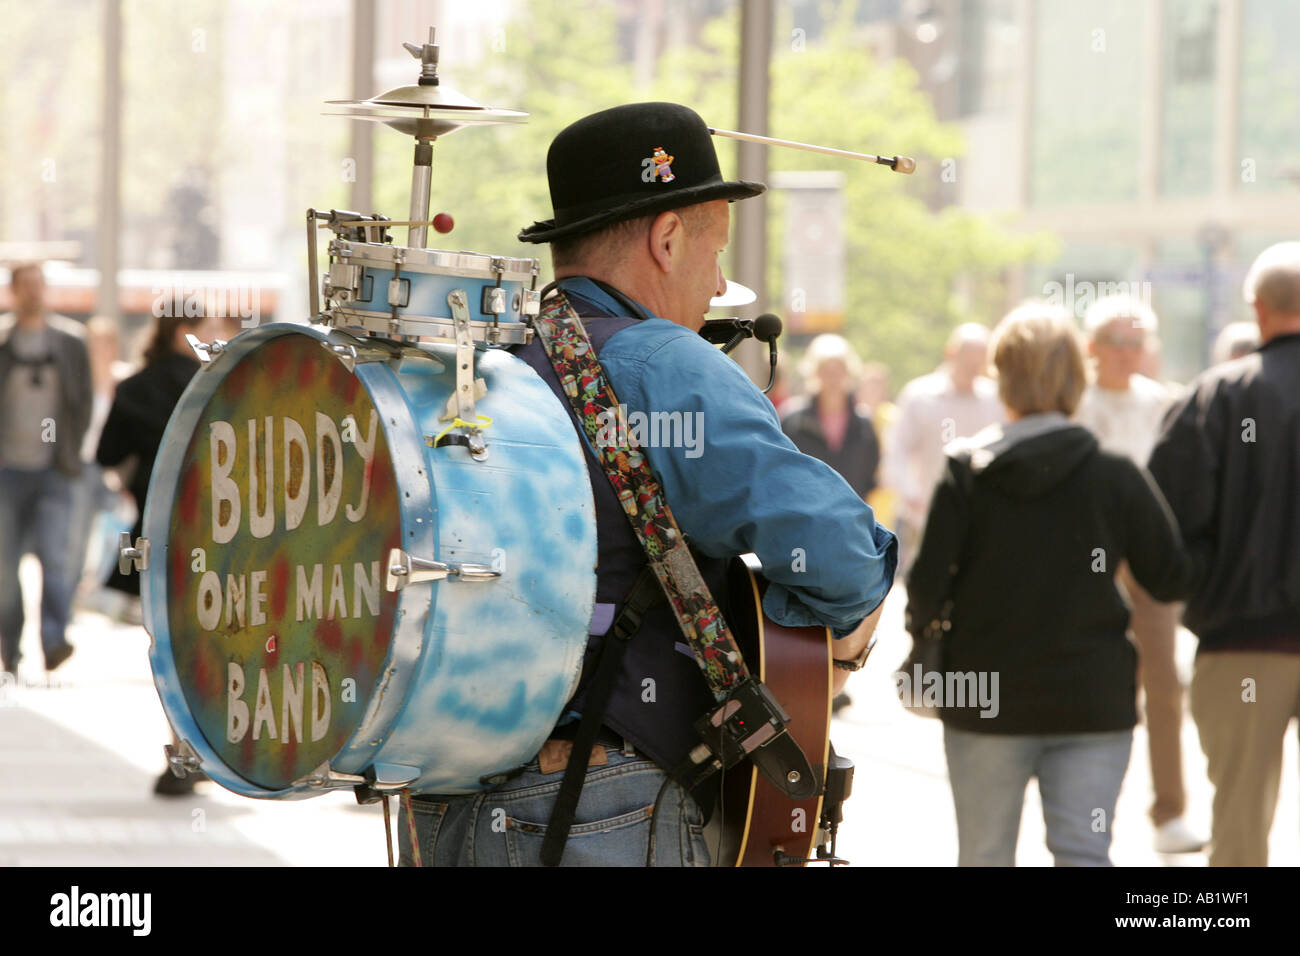 street musician one man band playing the concertina guitar drum cymbals  Manchester city center country music urban amusement spa Stock Photo - Alamy